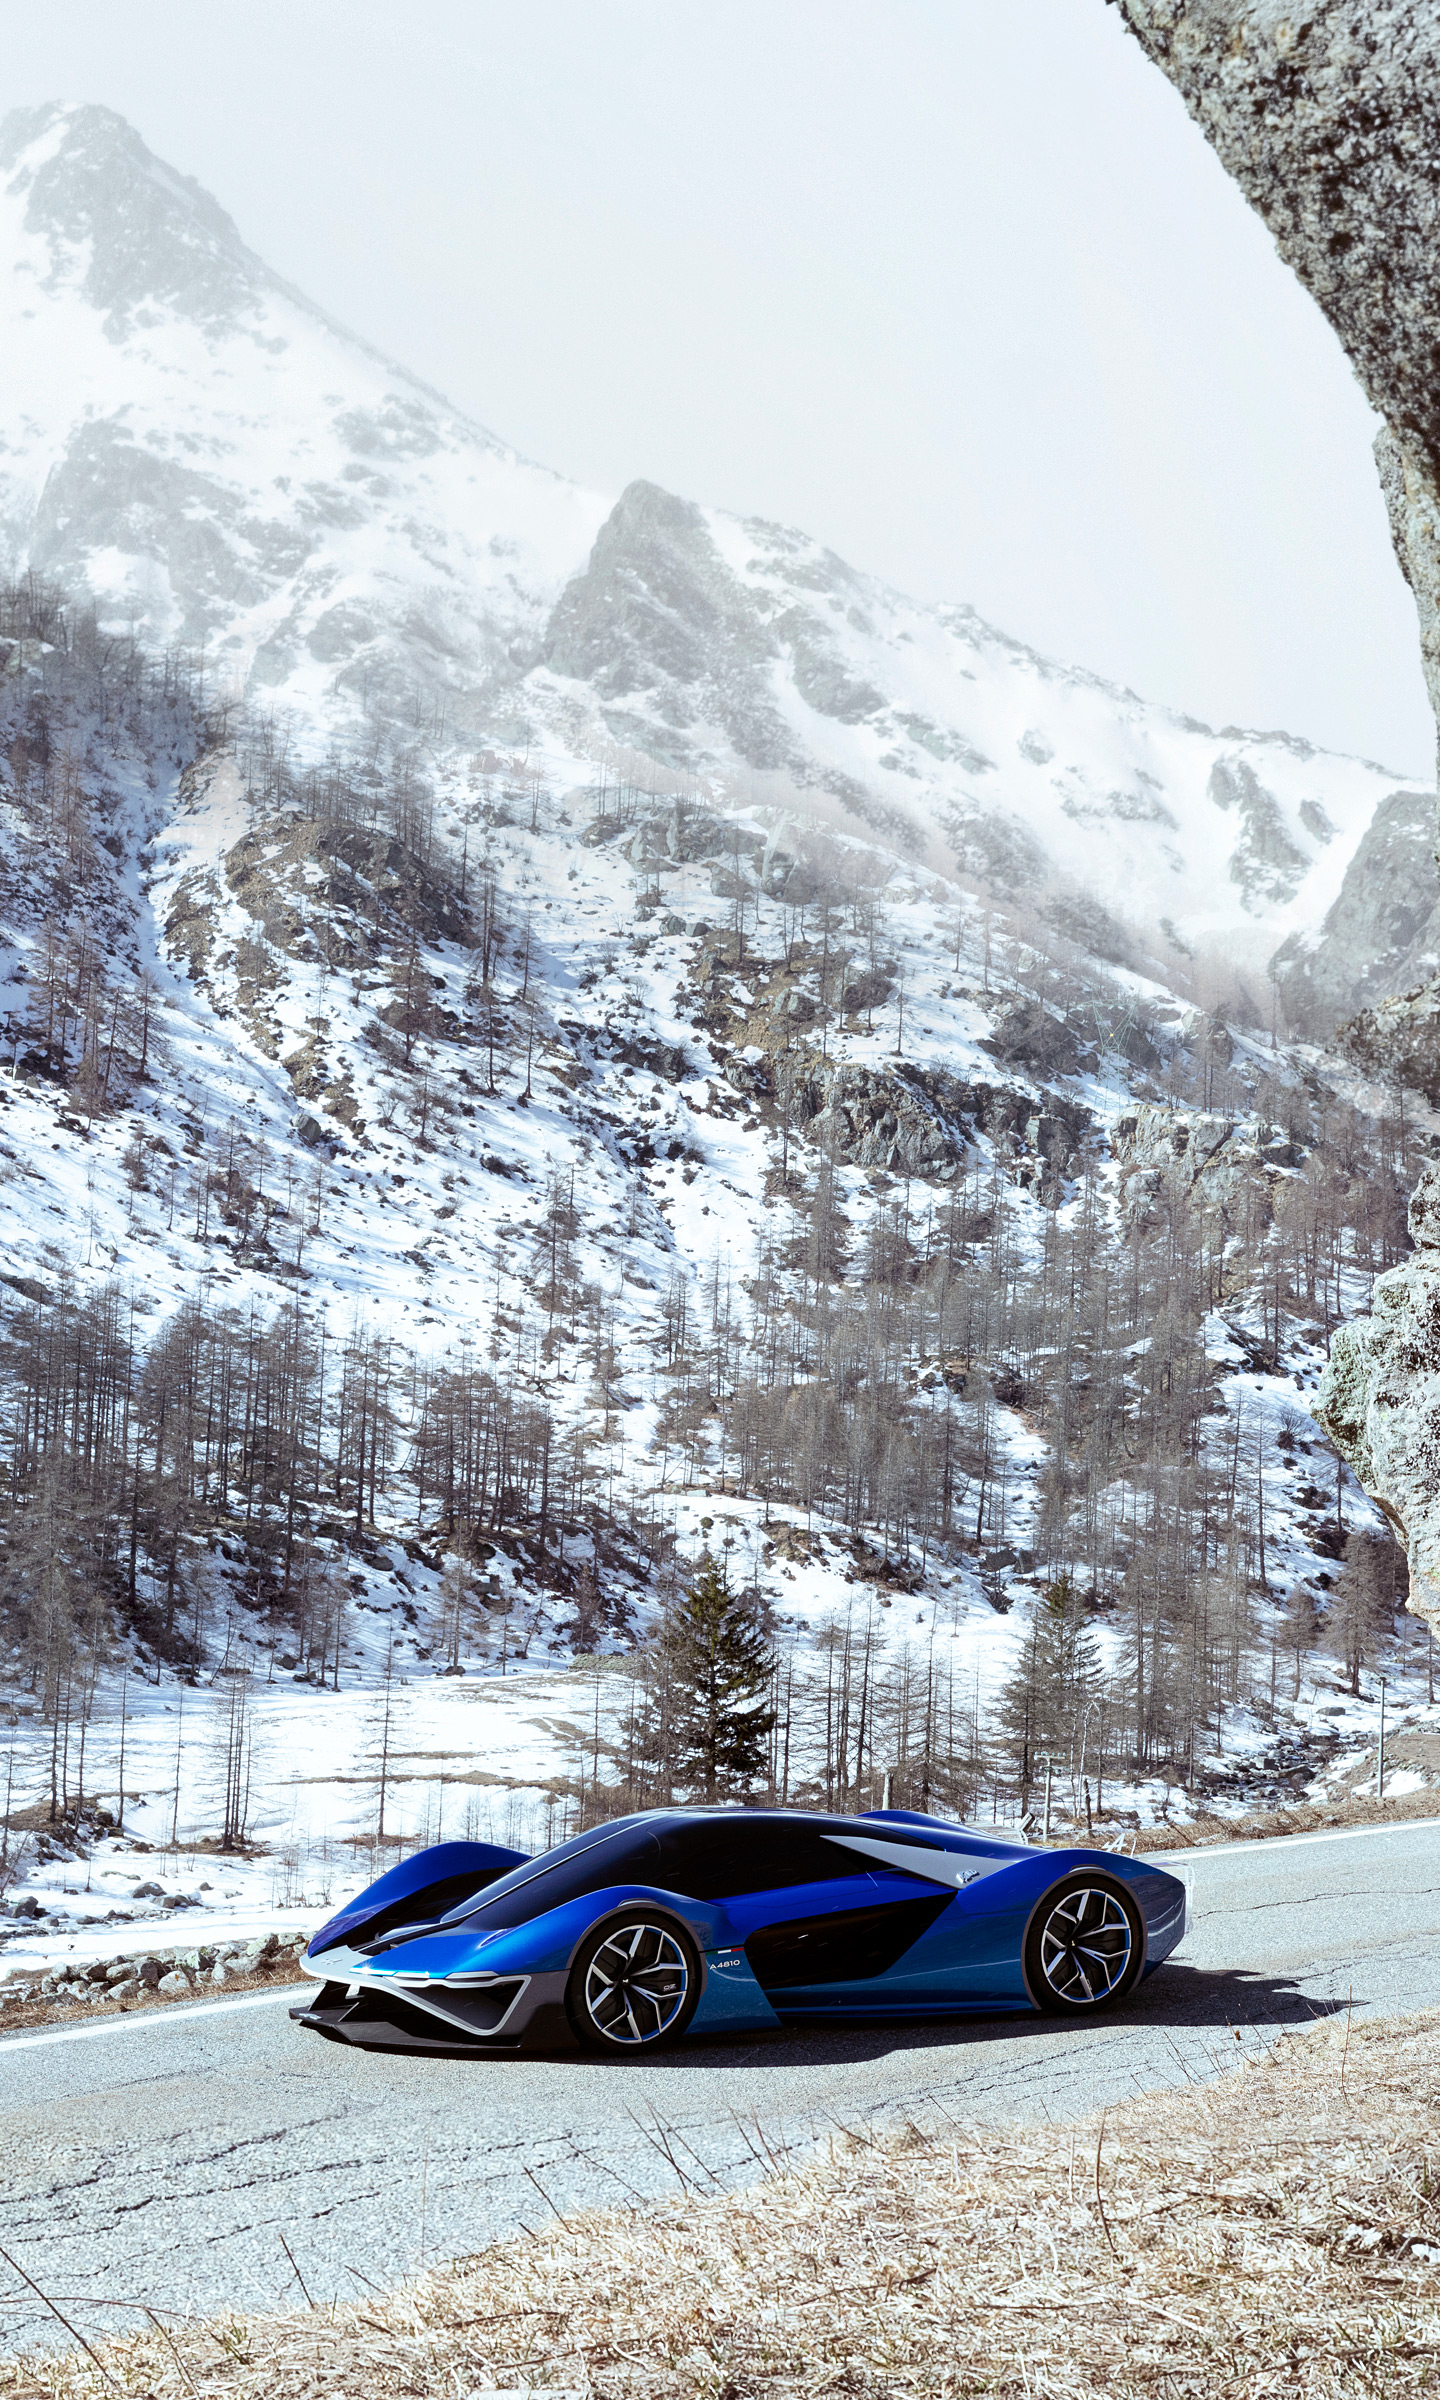  2022 Alpine A4810 by IED Concept Wallpaper.